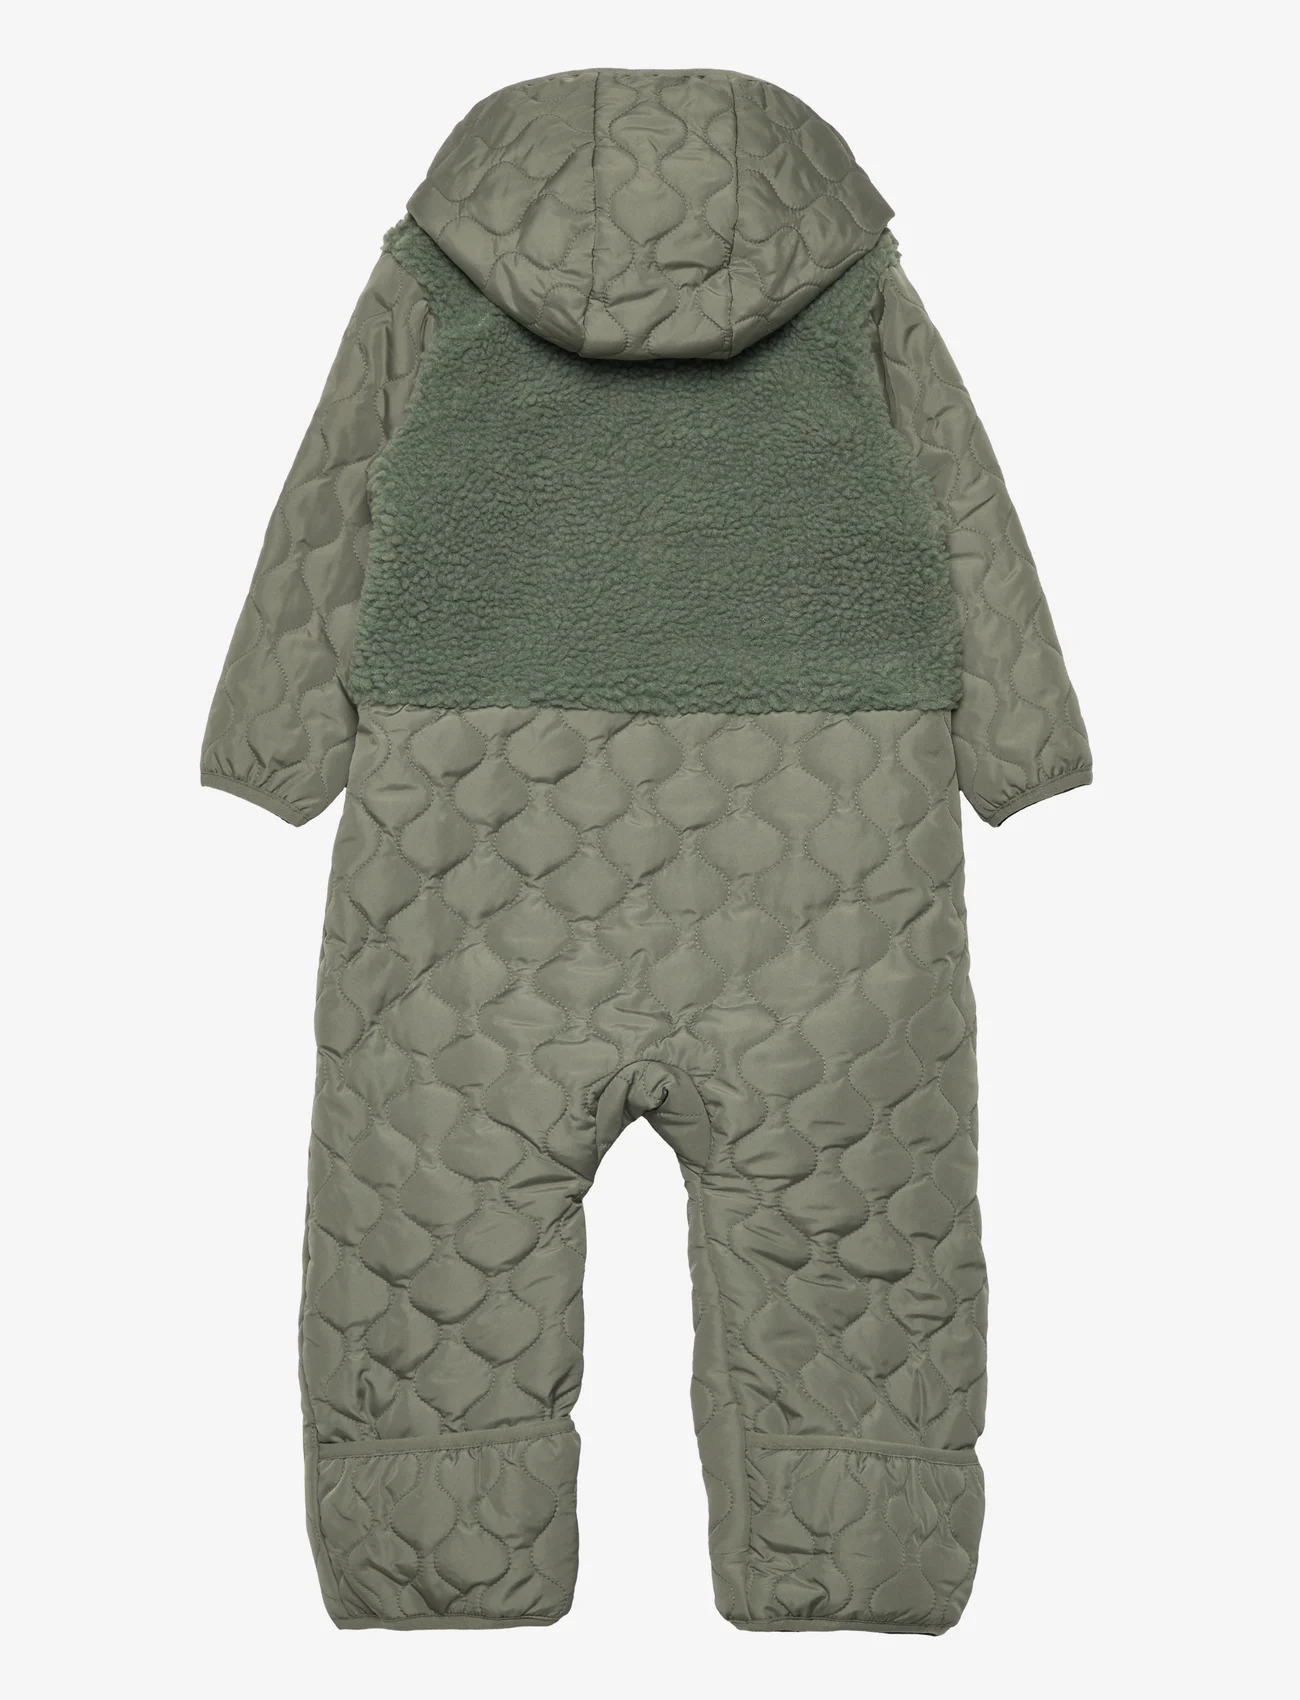 name it - NBNMEMBER QUILT SUIT TB - laveste priser - agave green - 1